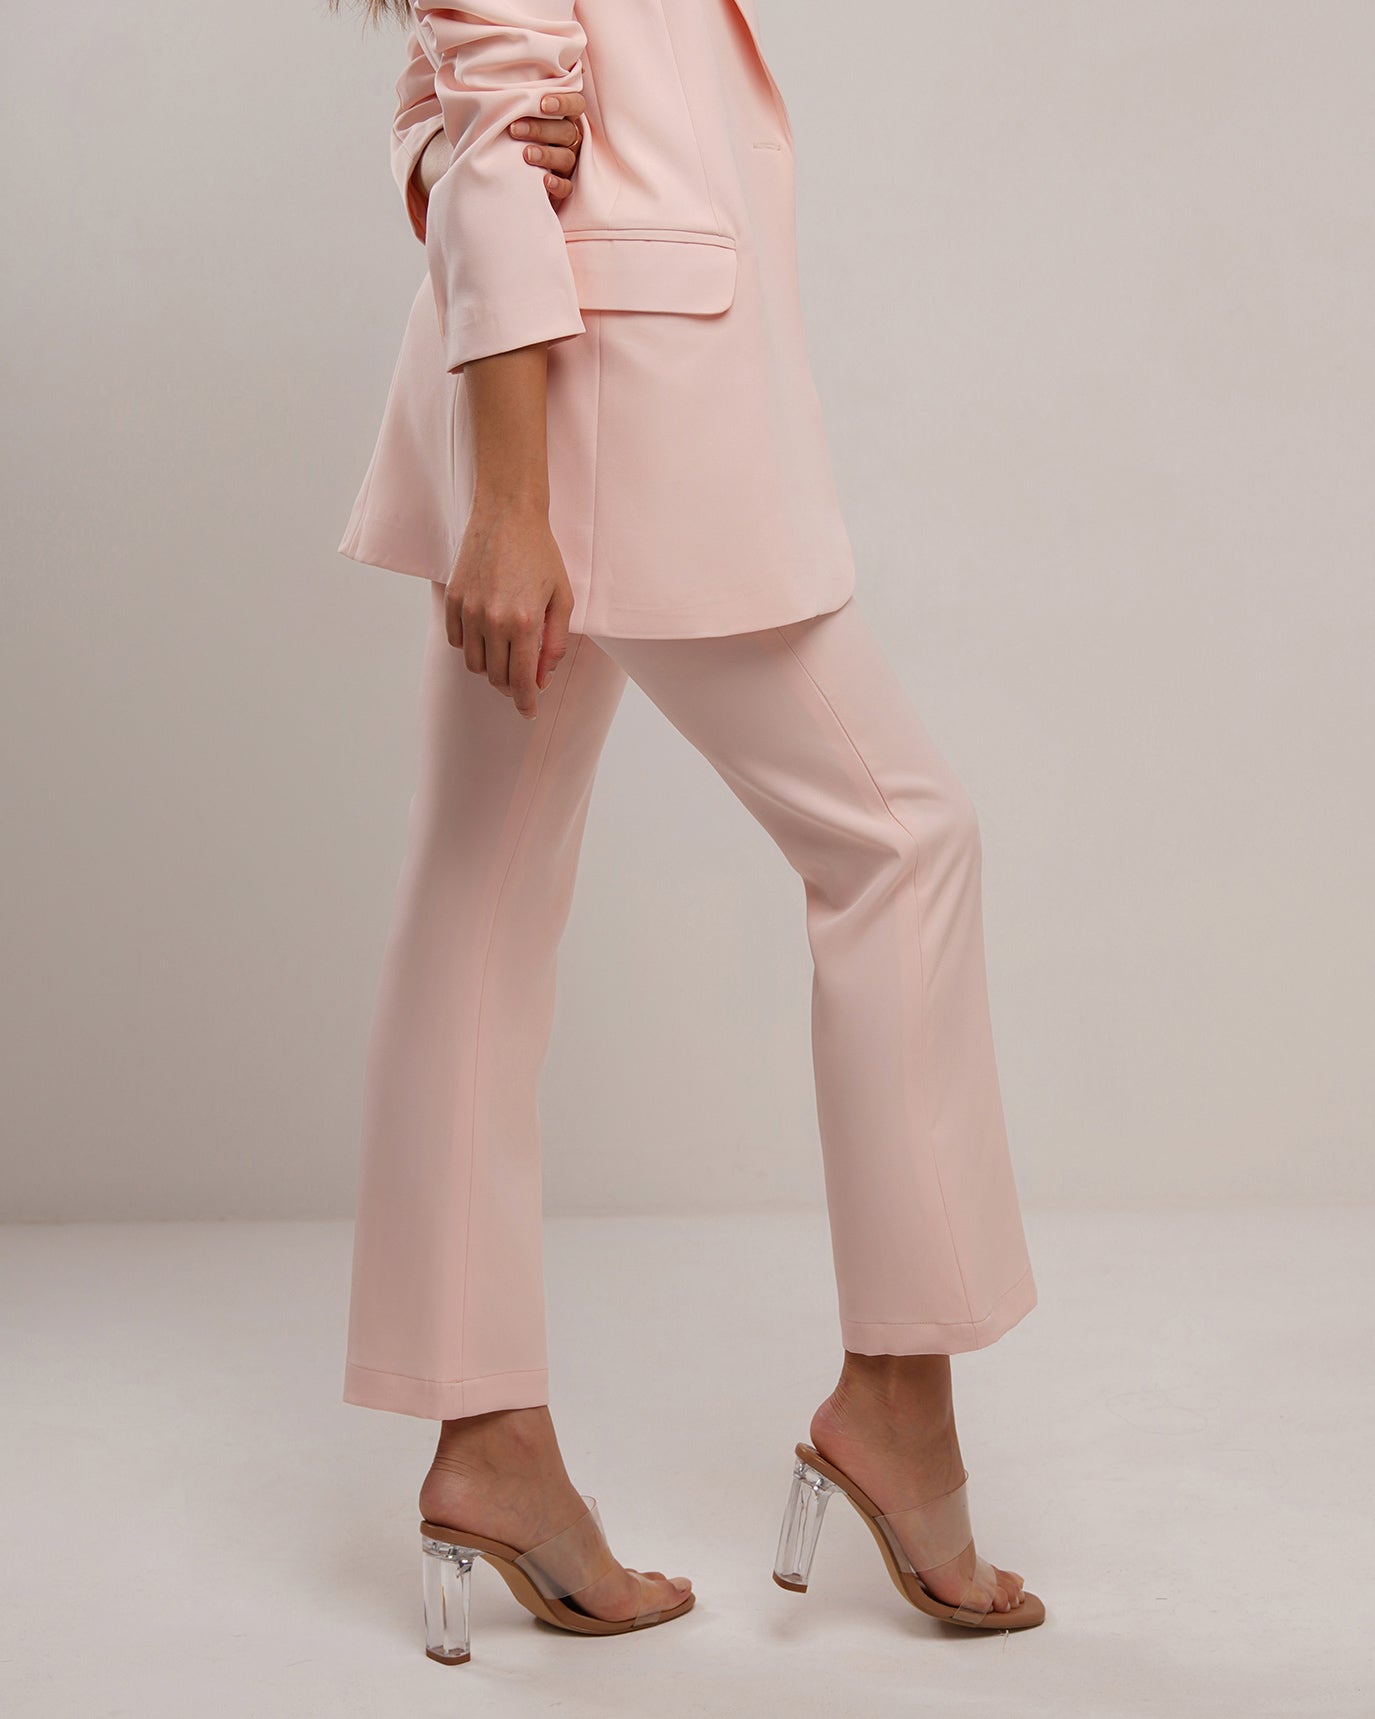 Sherbet peach classic jetted pocket flare trousers